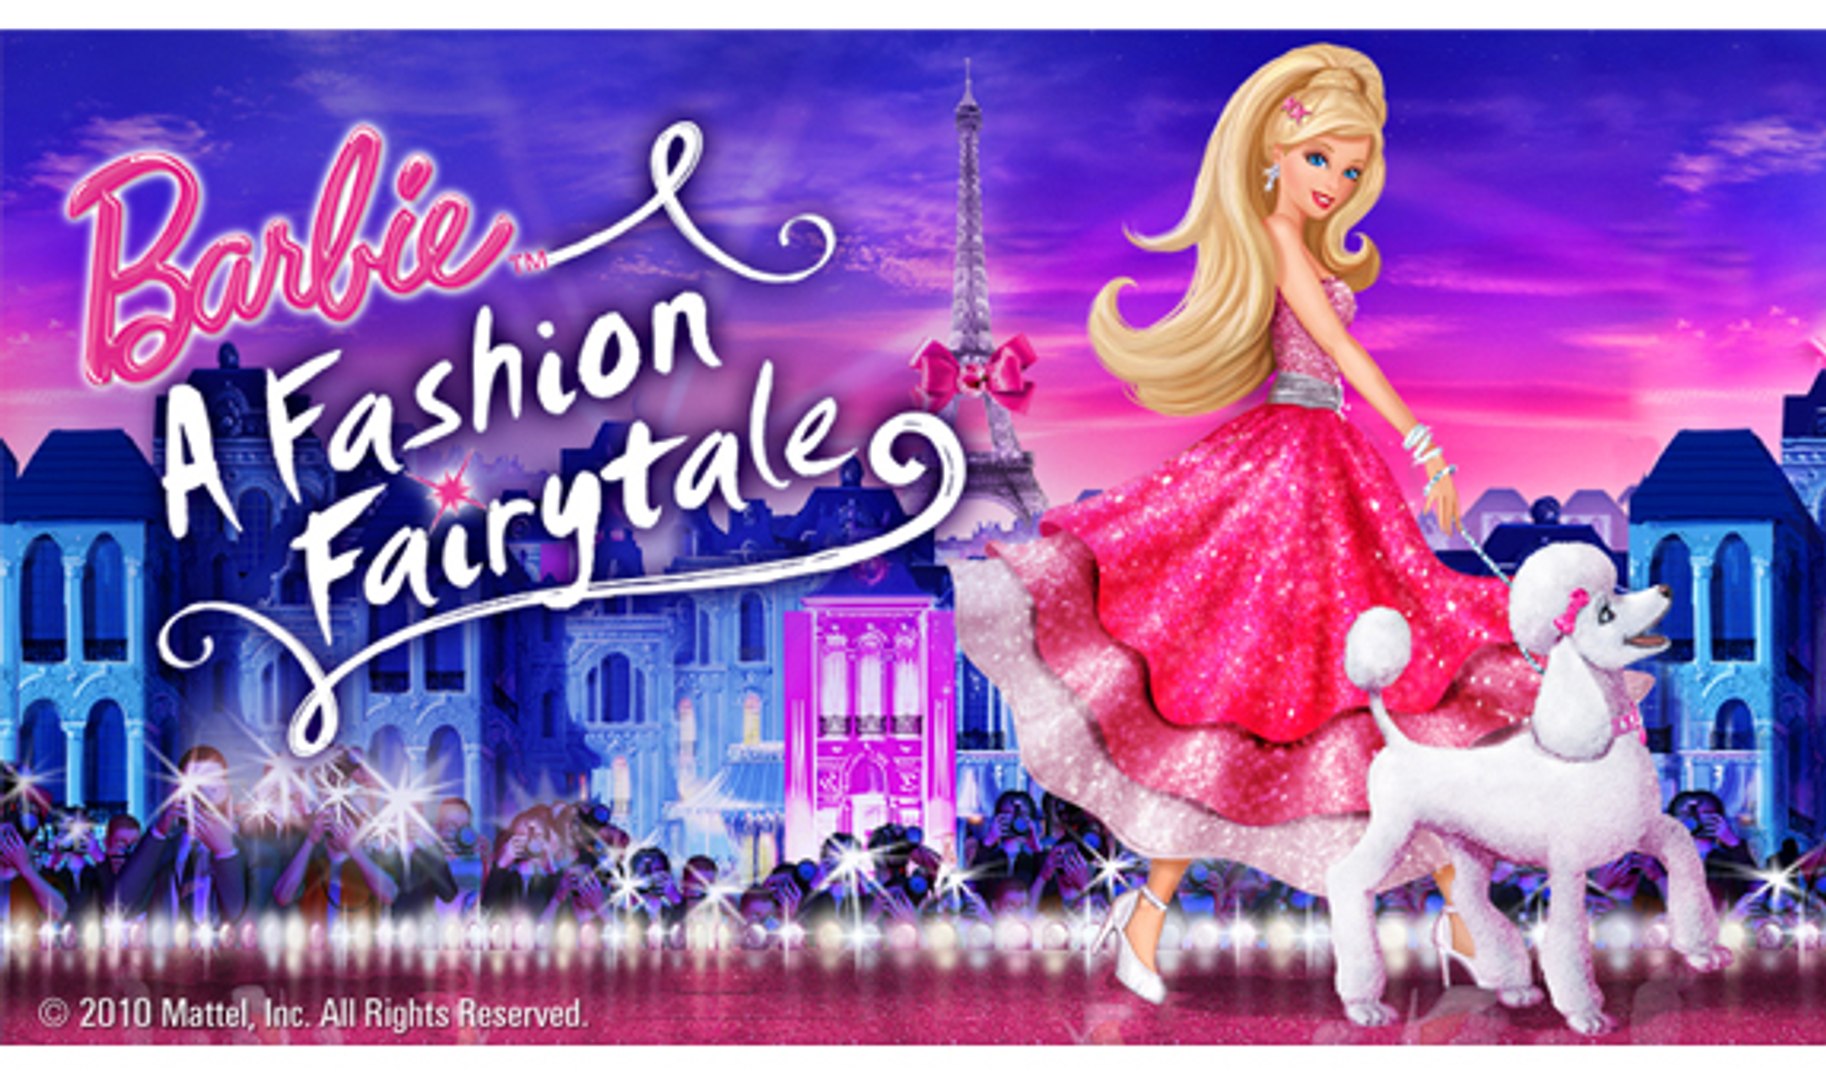 Streaming Barbie A Fashion Fairytale 2010 Full Movies Online